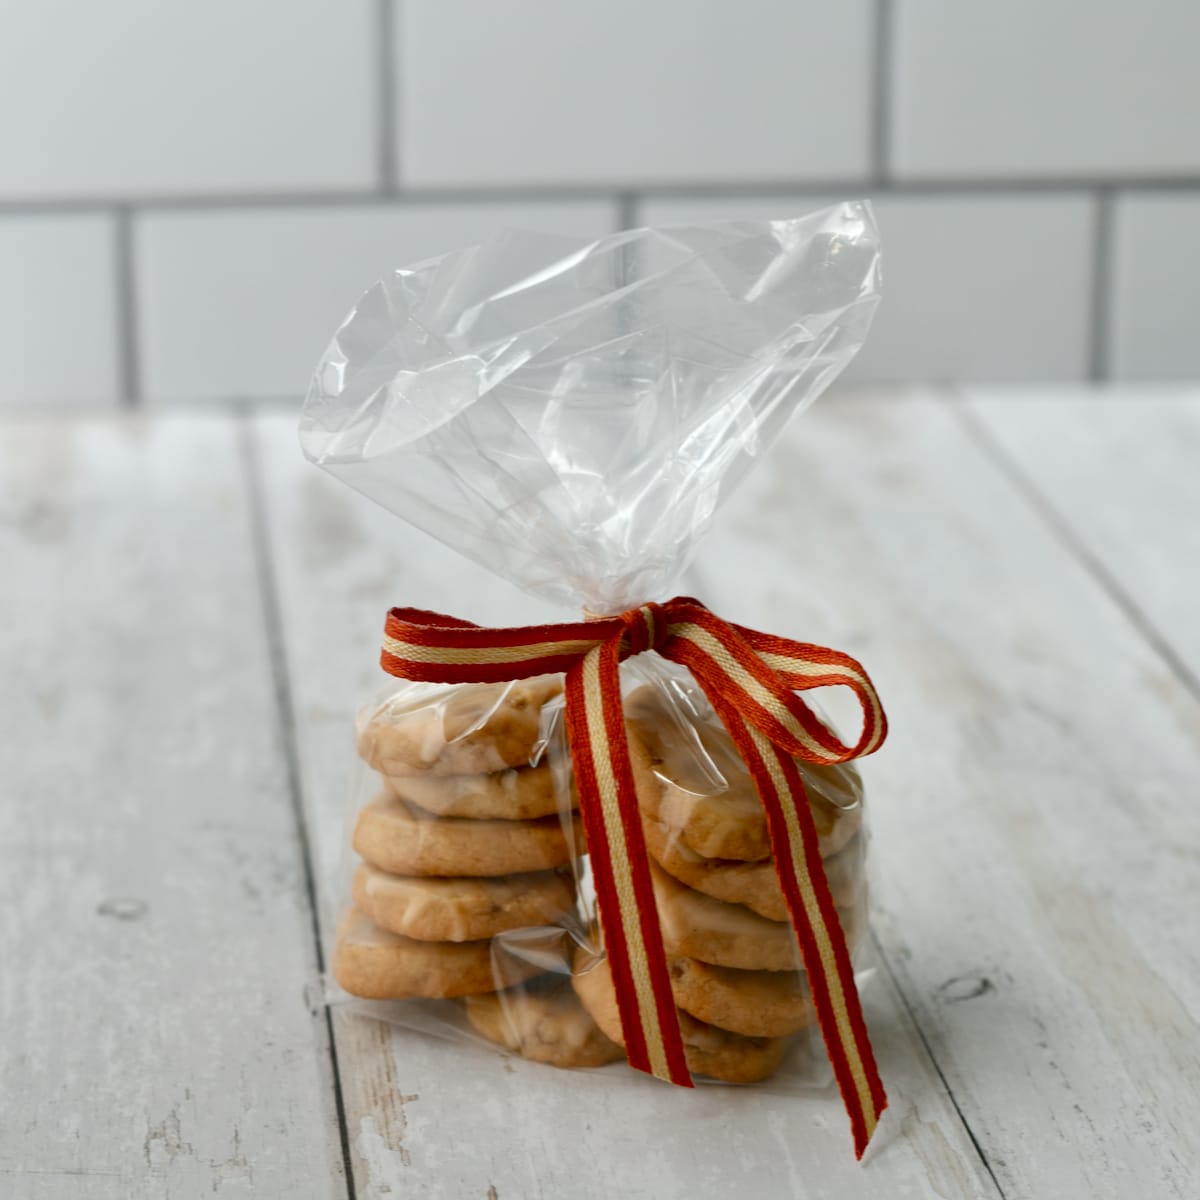 Maple pecan cookies in cellophane gift bag tied with ribbon.